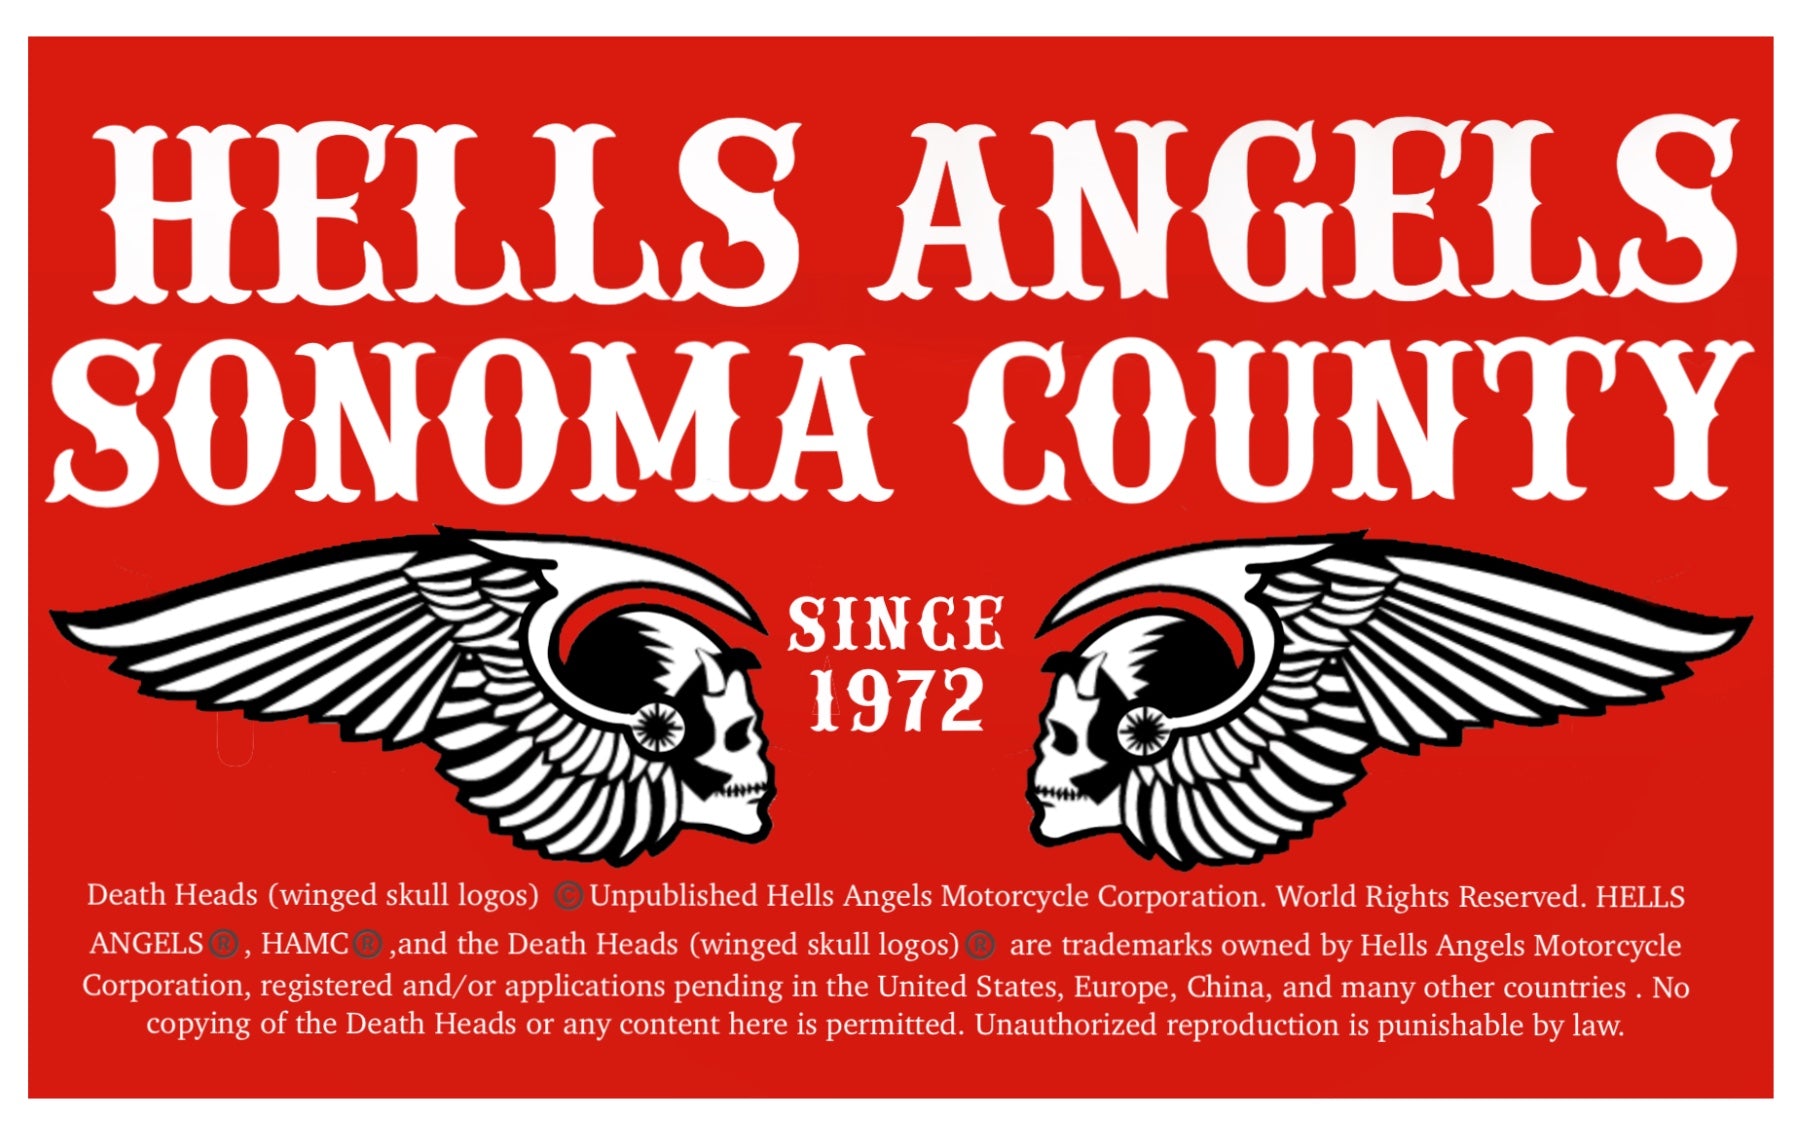 Hells Angels Sonoma County